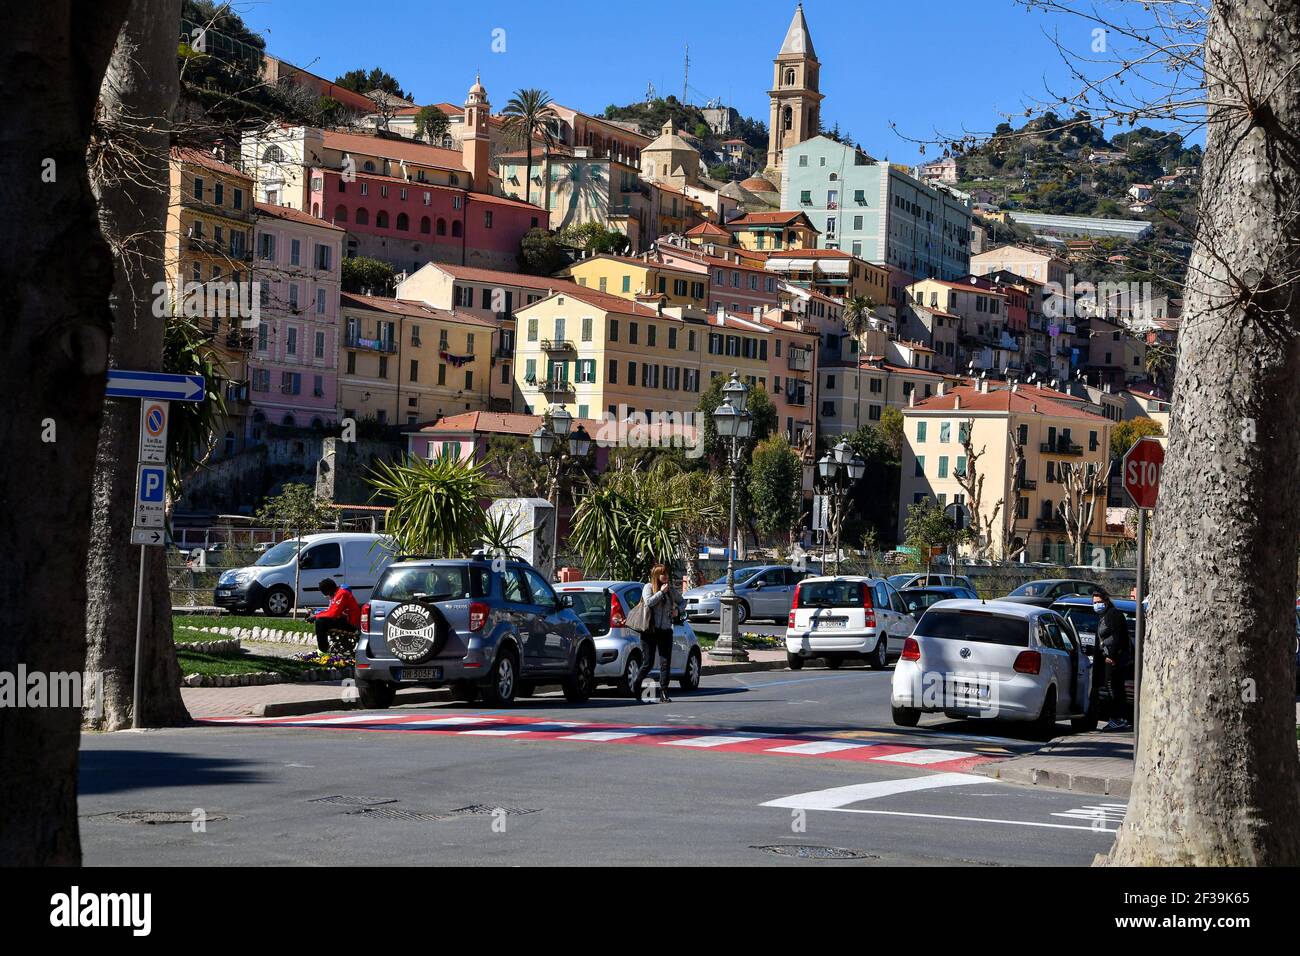 A general view of Ventimiglia, Italy on March 15, 2021. Ventimiglia entered  orange zone as Italians woke up on Monday morning to the beginning of yet  another Covid-19 lockdown. Eleven regions have